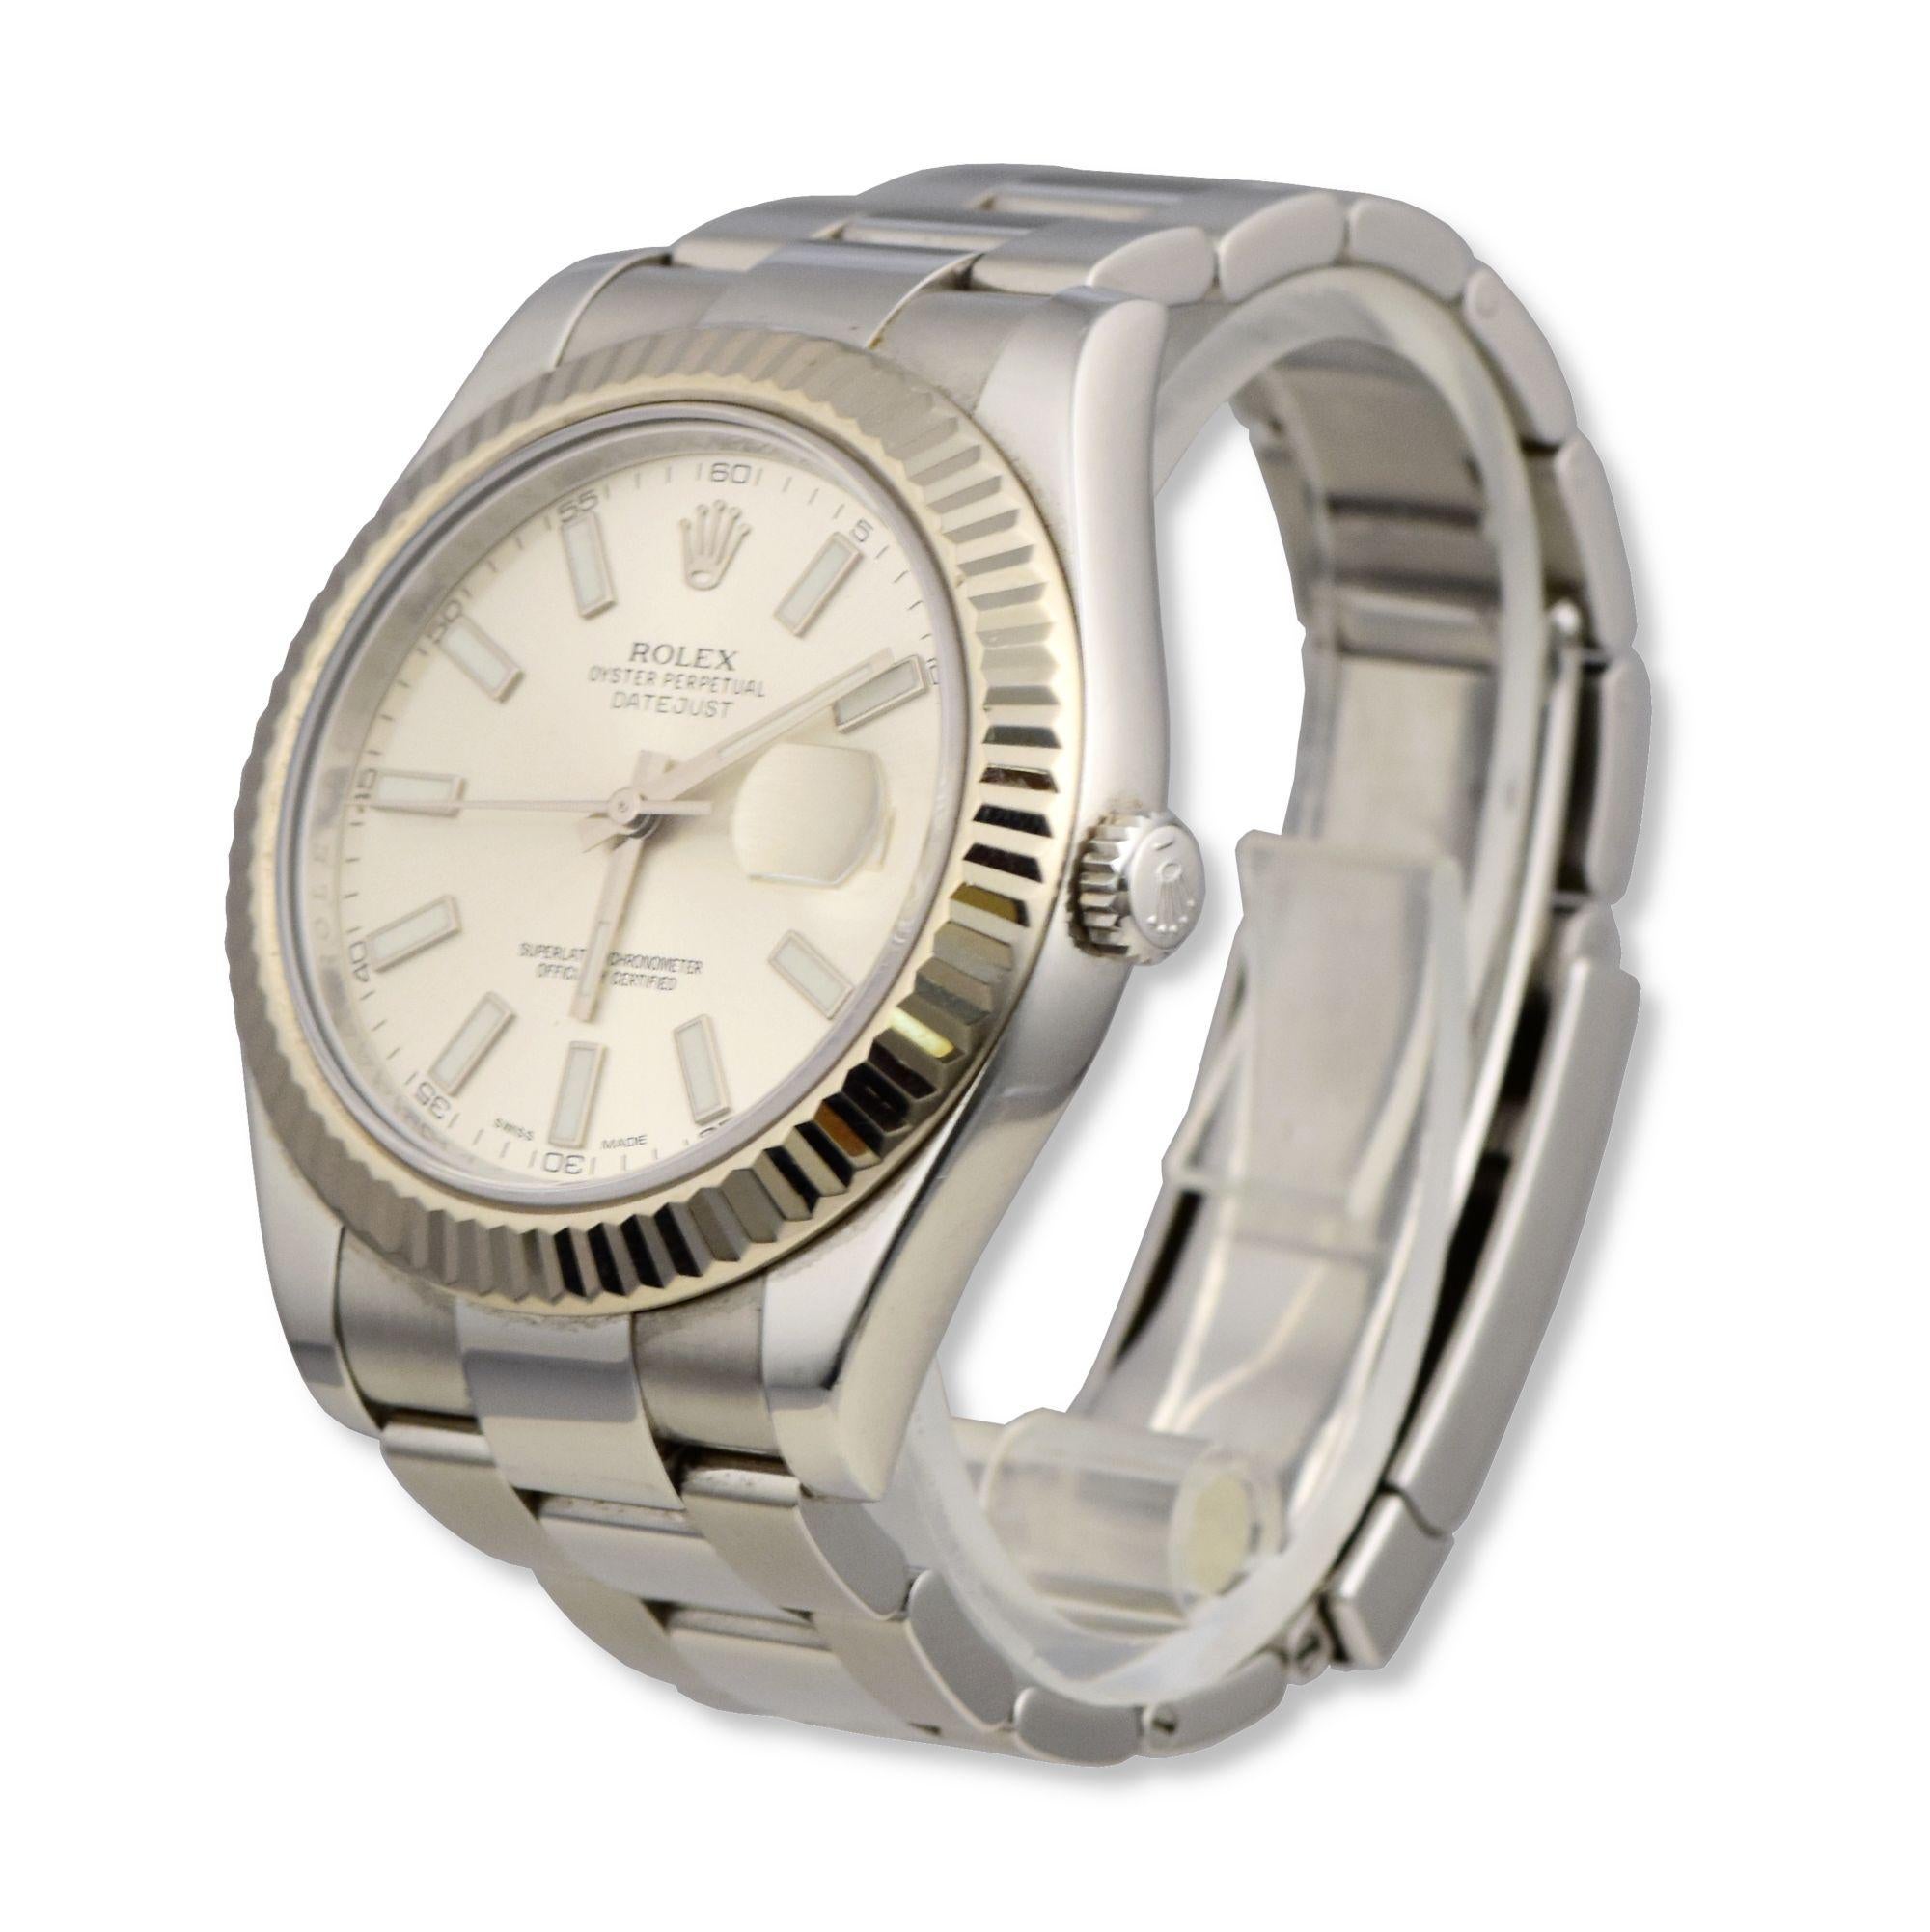 Brand: Rolex
Model Name: Datejust
Model Number:  116334
Movement: Automatic
Case Size: 41 mm
Case Back: Closed
Case Material: Stainless Steel
Bezel: Flutted
Dial: Silver
Bracelet:  Oyster
Hour Markers: Non Numeric
Features: Hours, Minutes, Seconds,